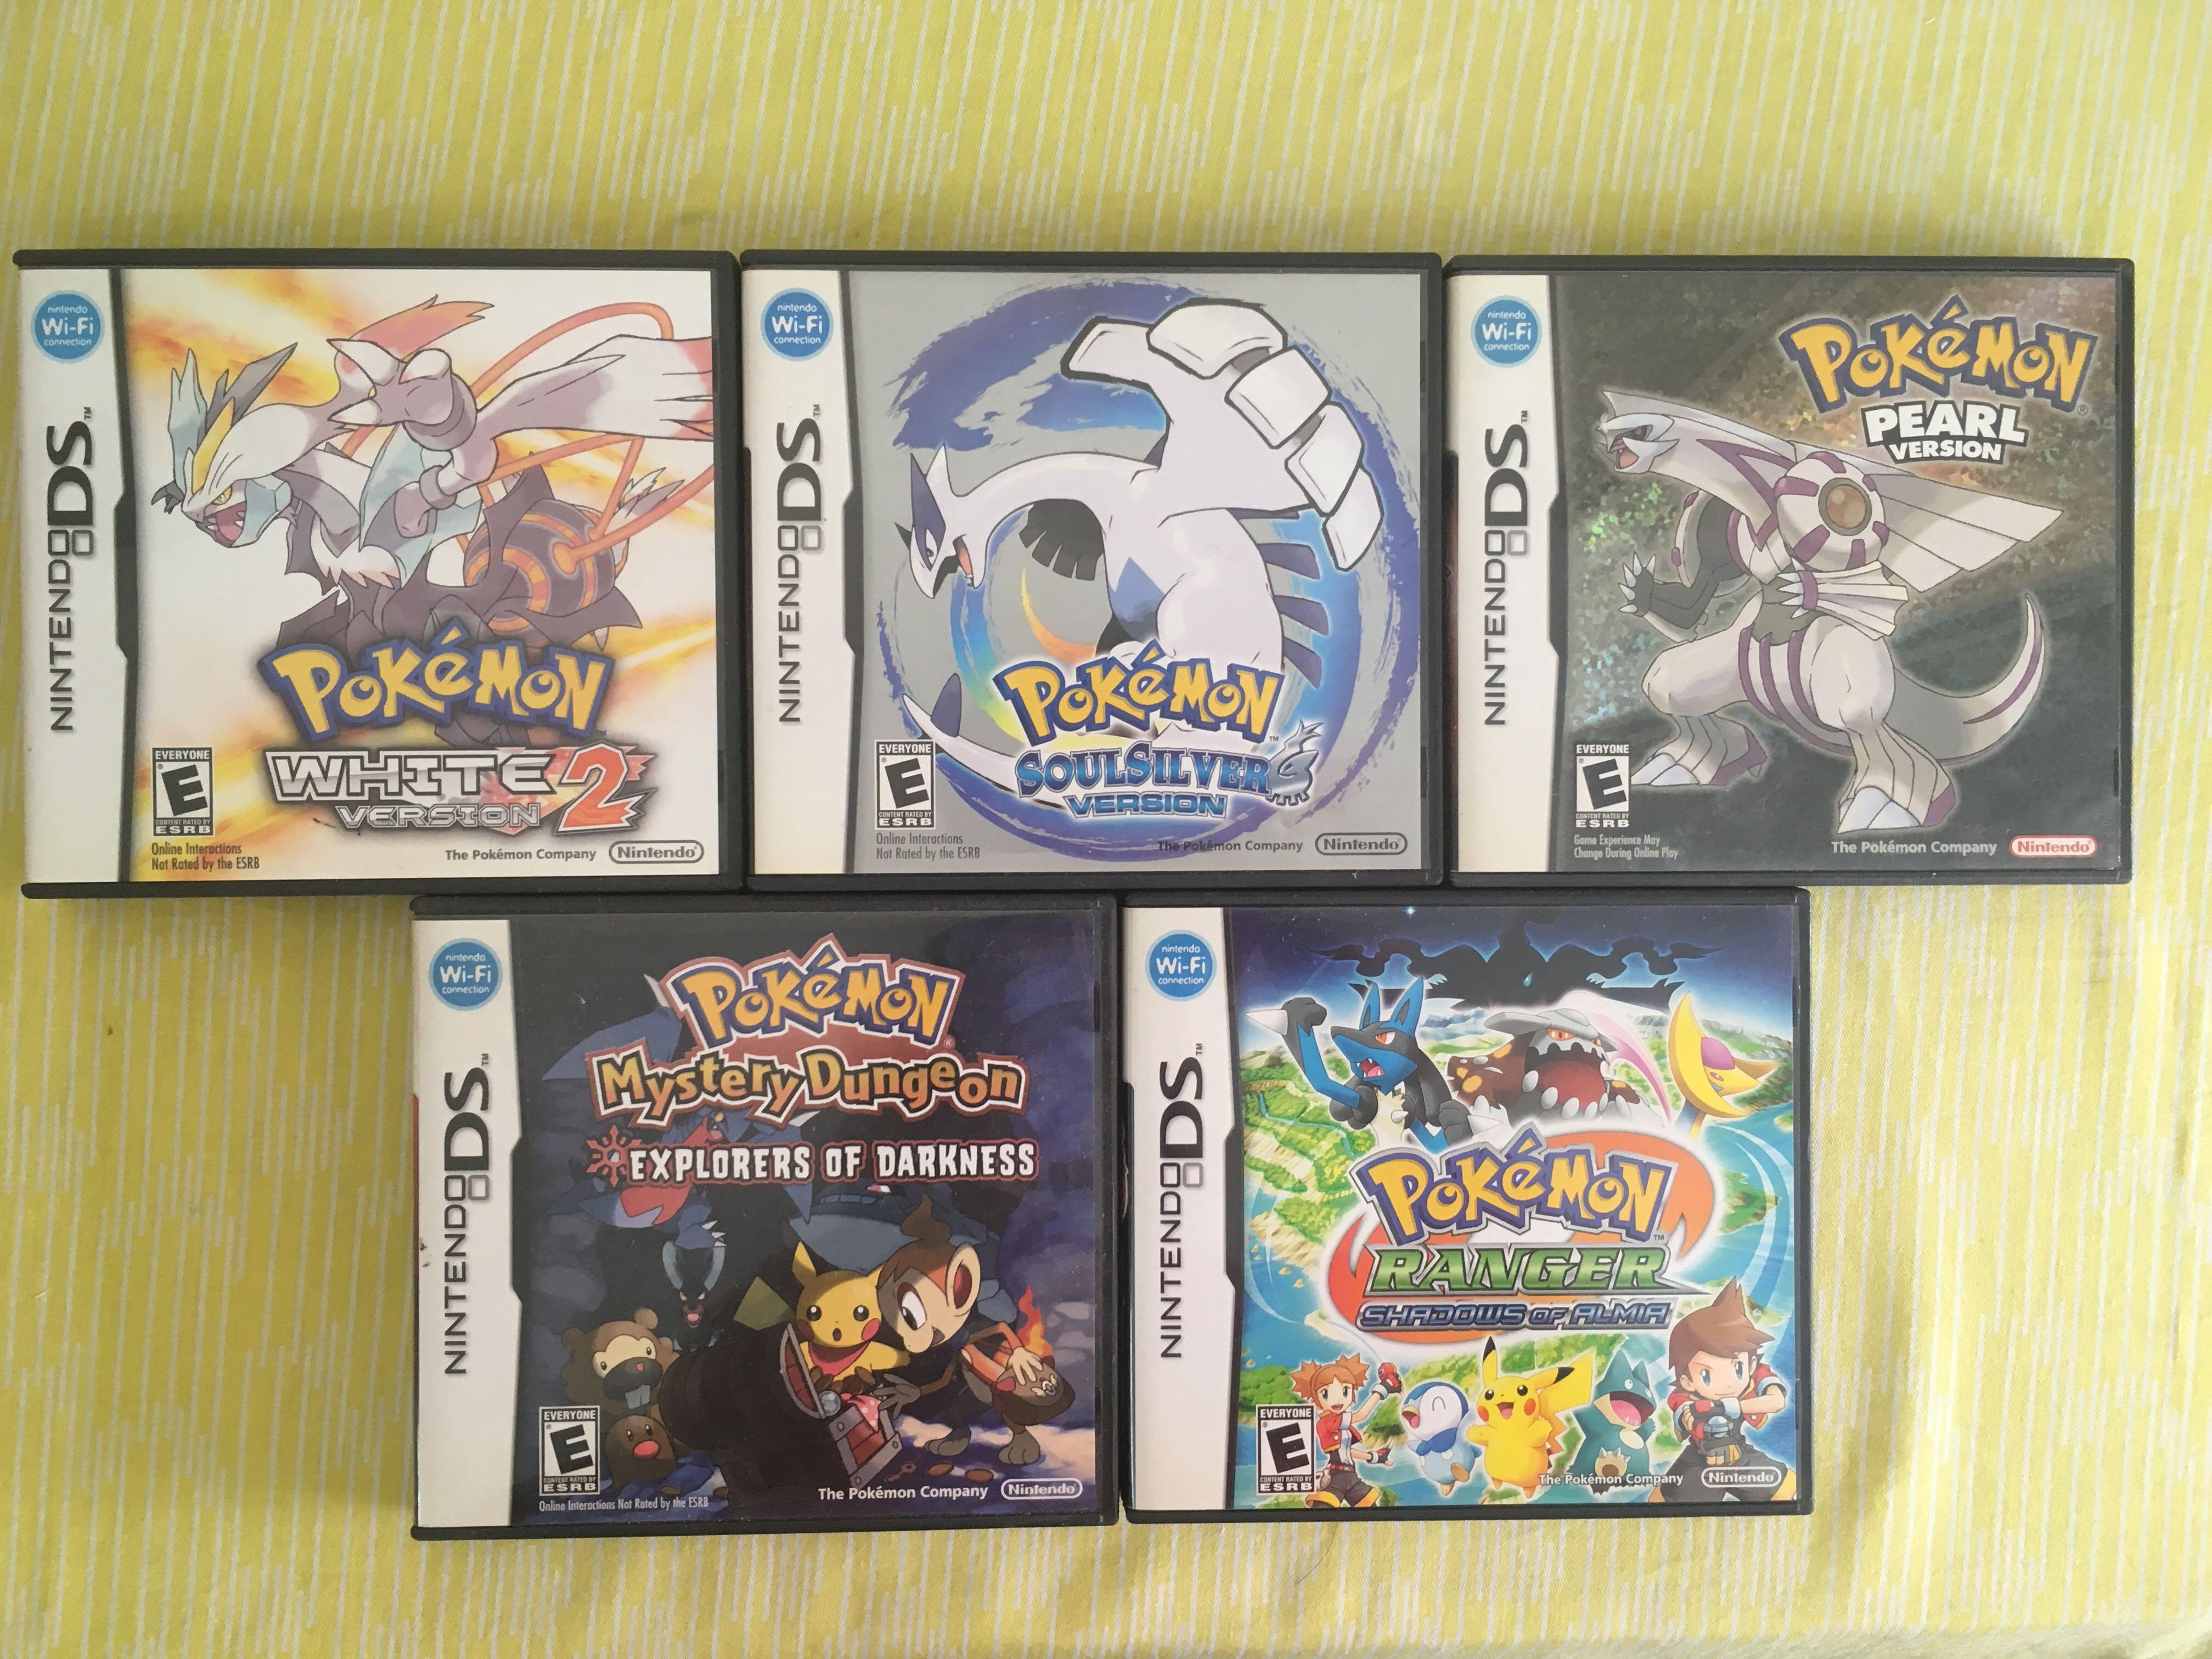 play pokemon ds games online